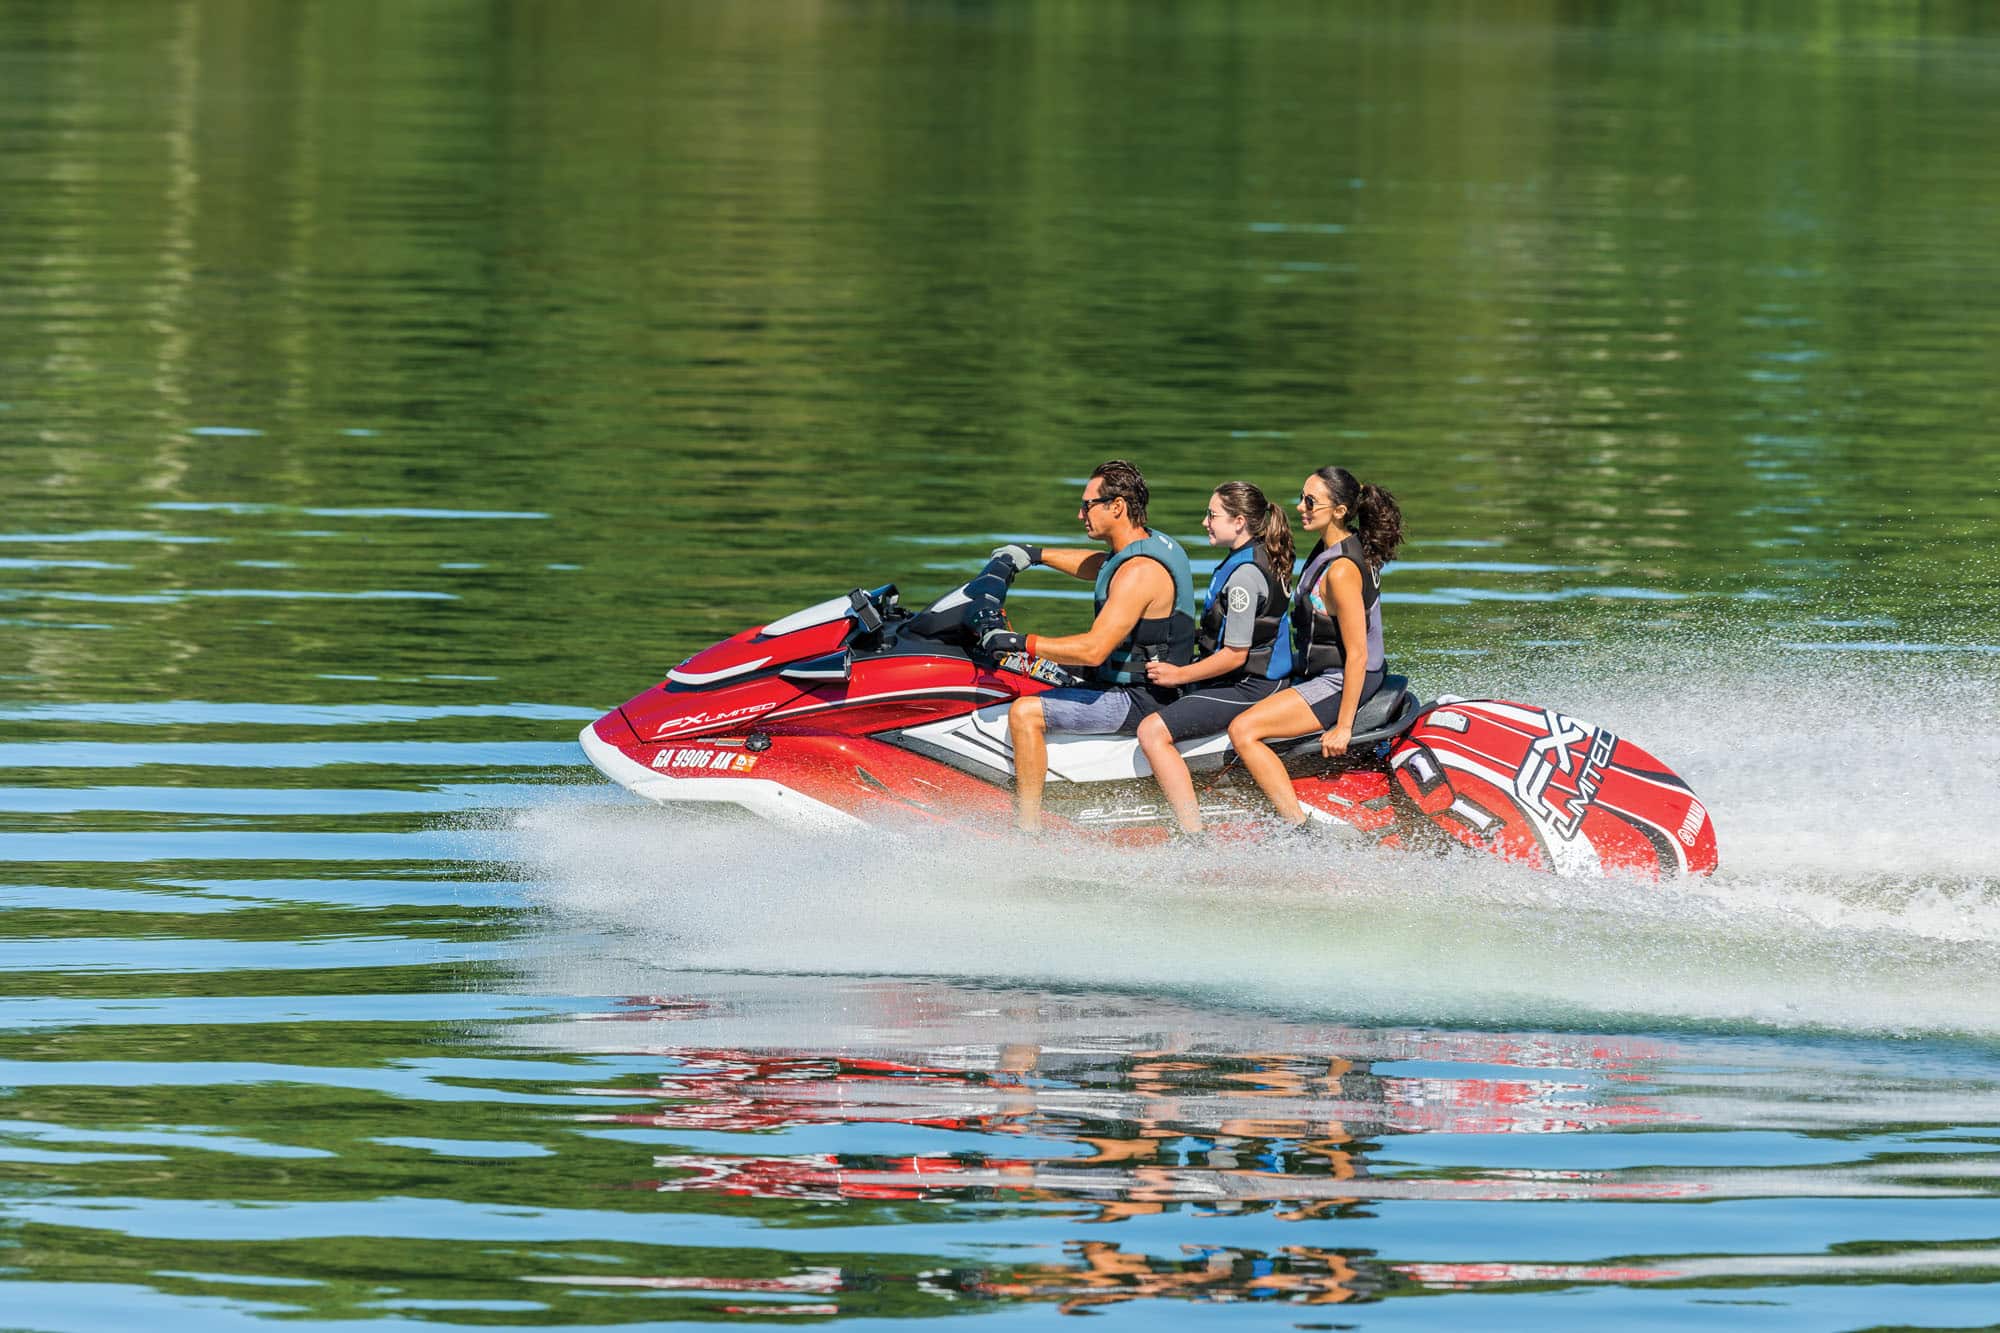 New Models, Major Updates, and Industry-Firsts for 2019 Yamaha WaveRunner®  Line